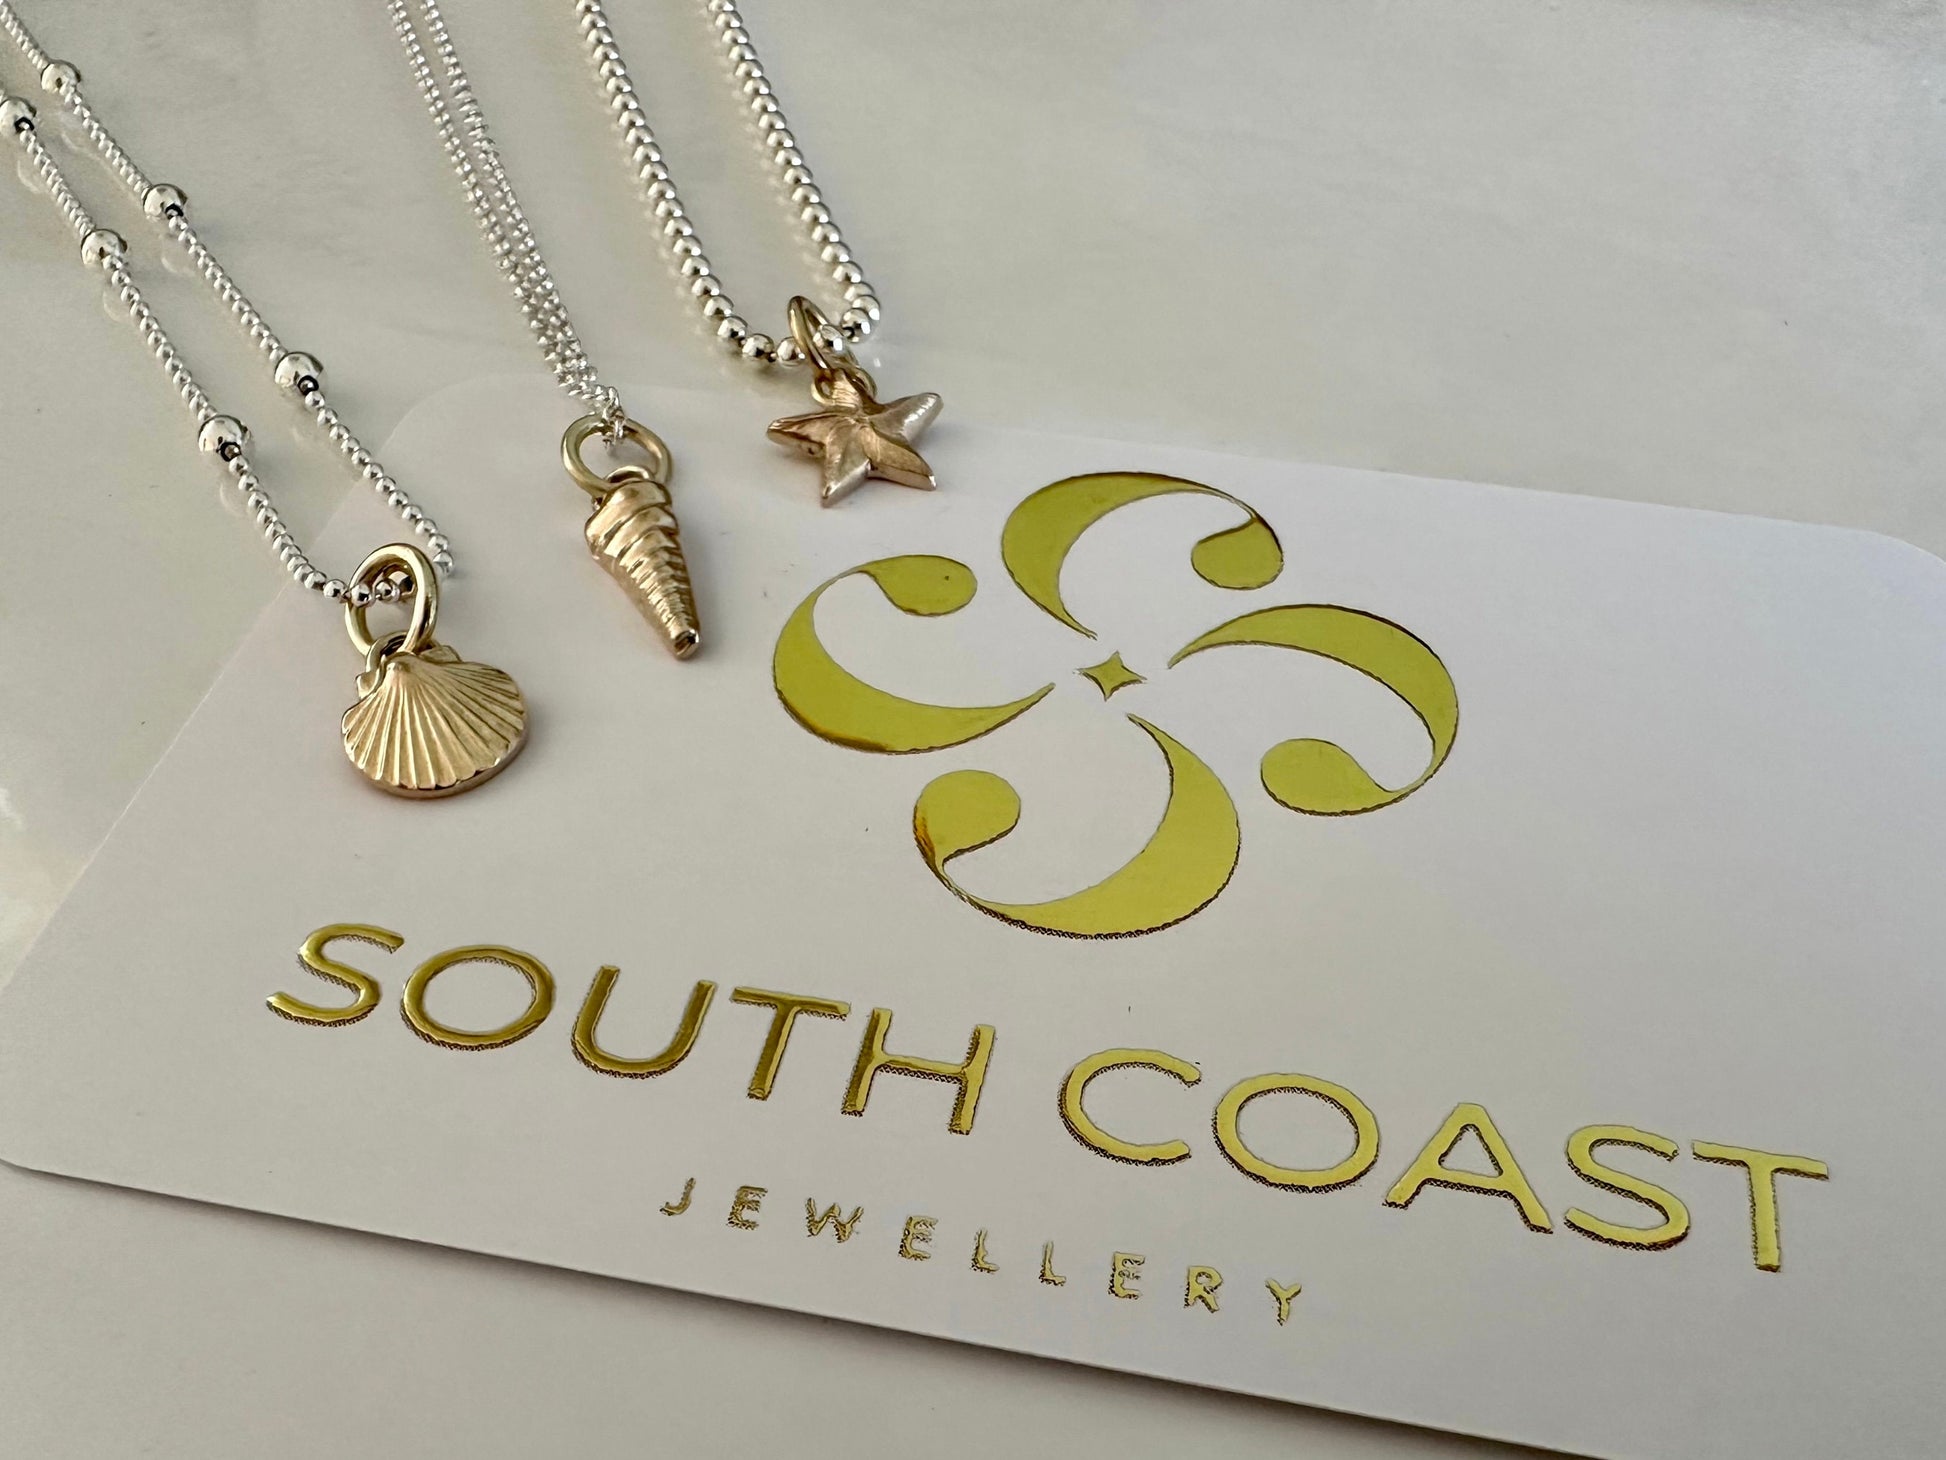 Hallmarked solid 9ct gold starfish pendant charm necklace, handmade from recycled 9ct gold, Ready to ship